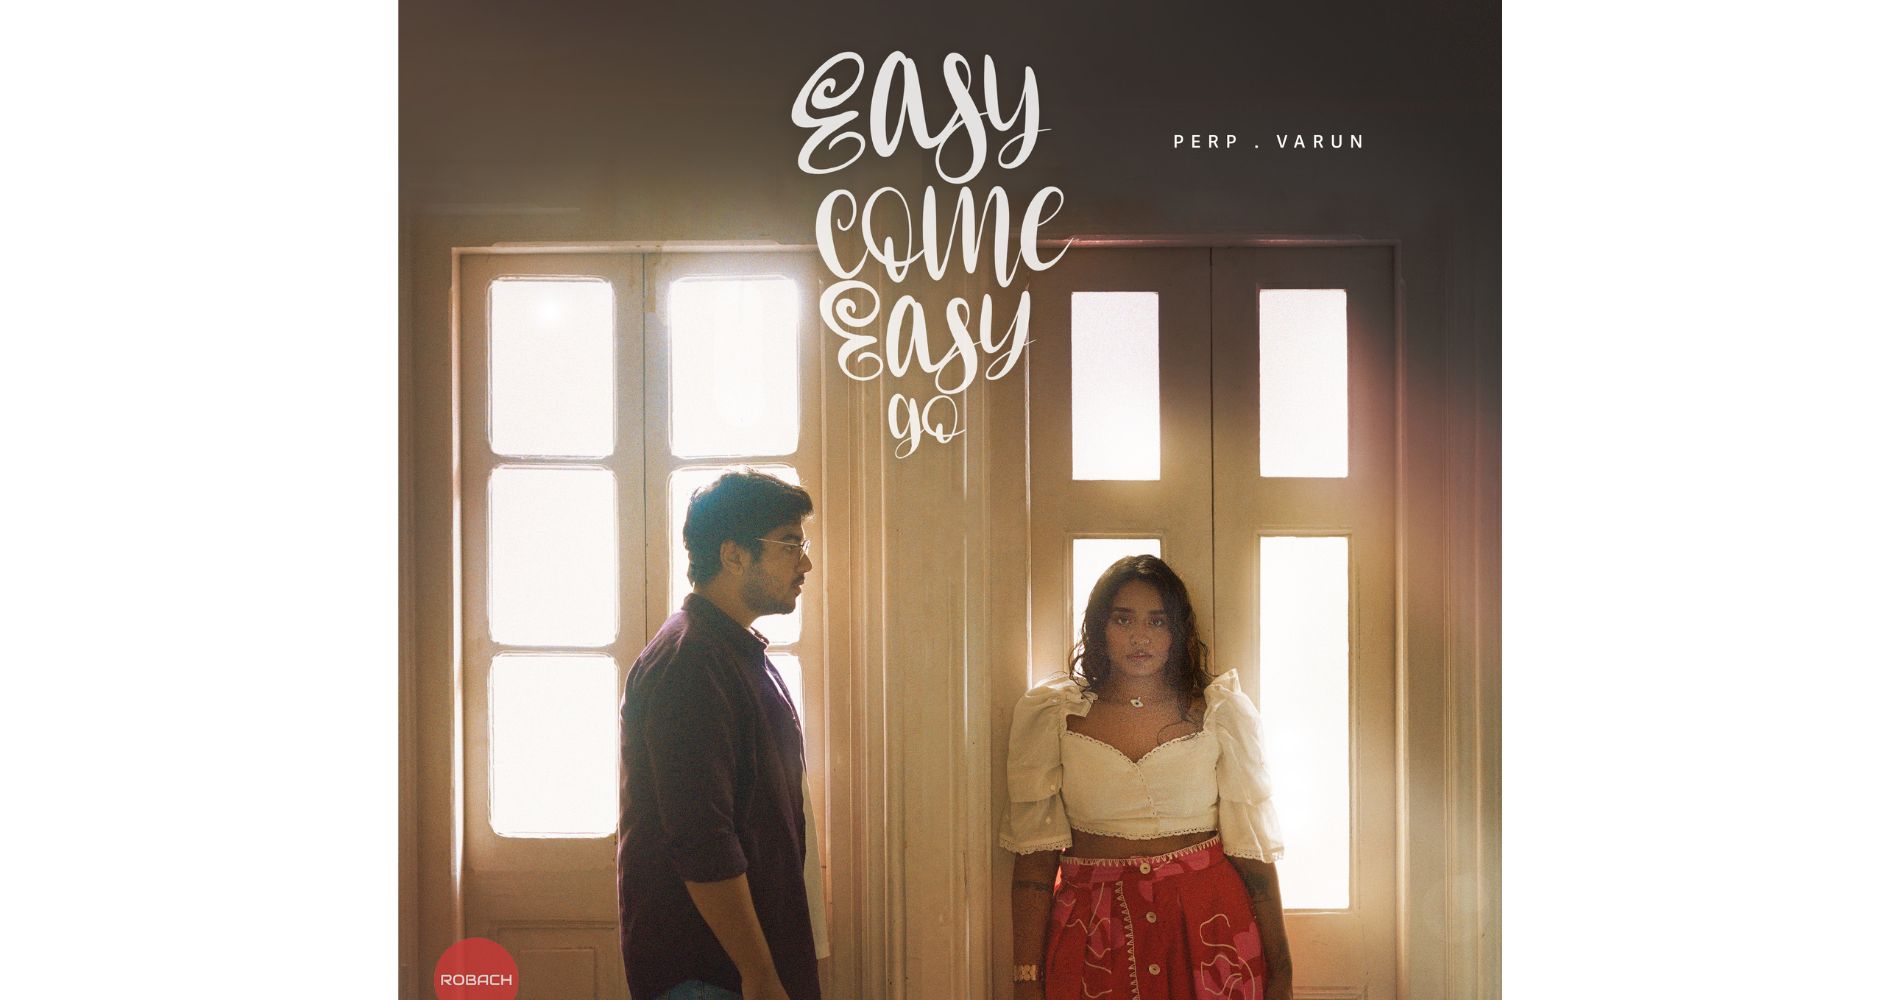 Mumbai's Dynamic Duo: PERP & Varun Collaborate On New Track 'Easy Come Easy Go'